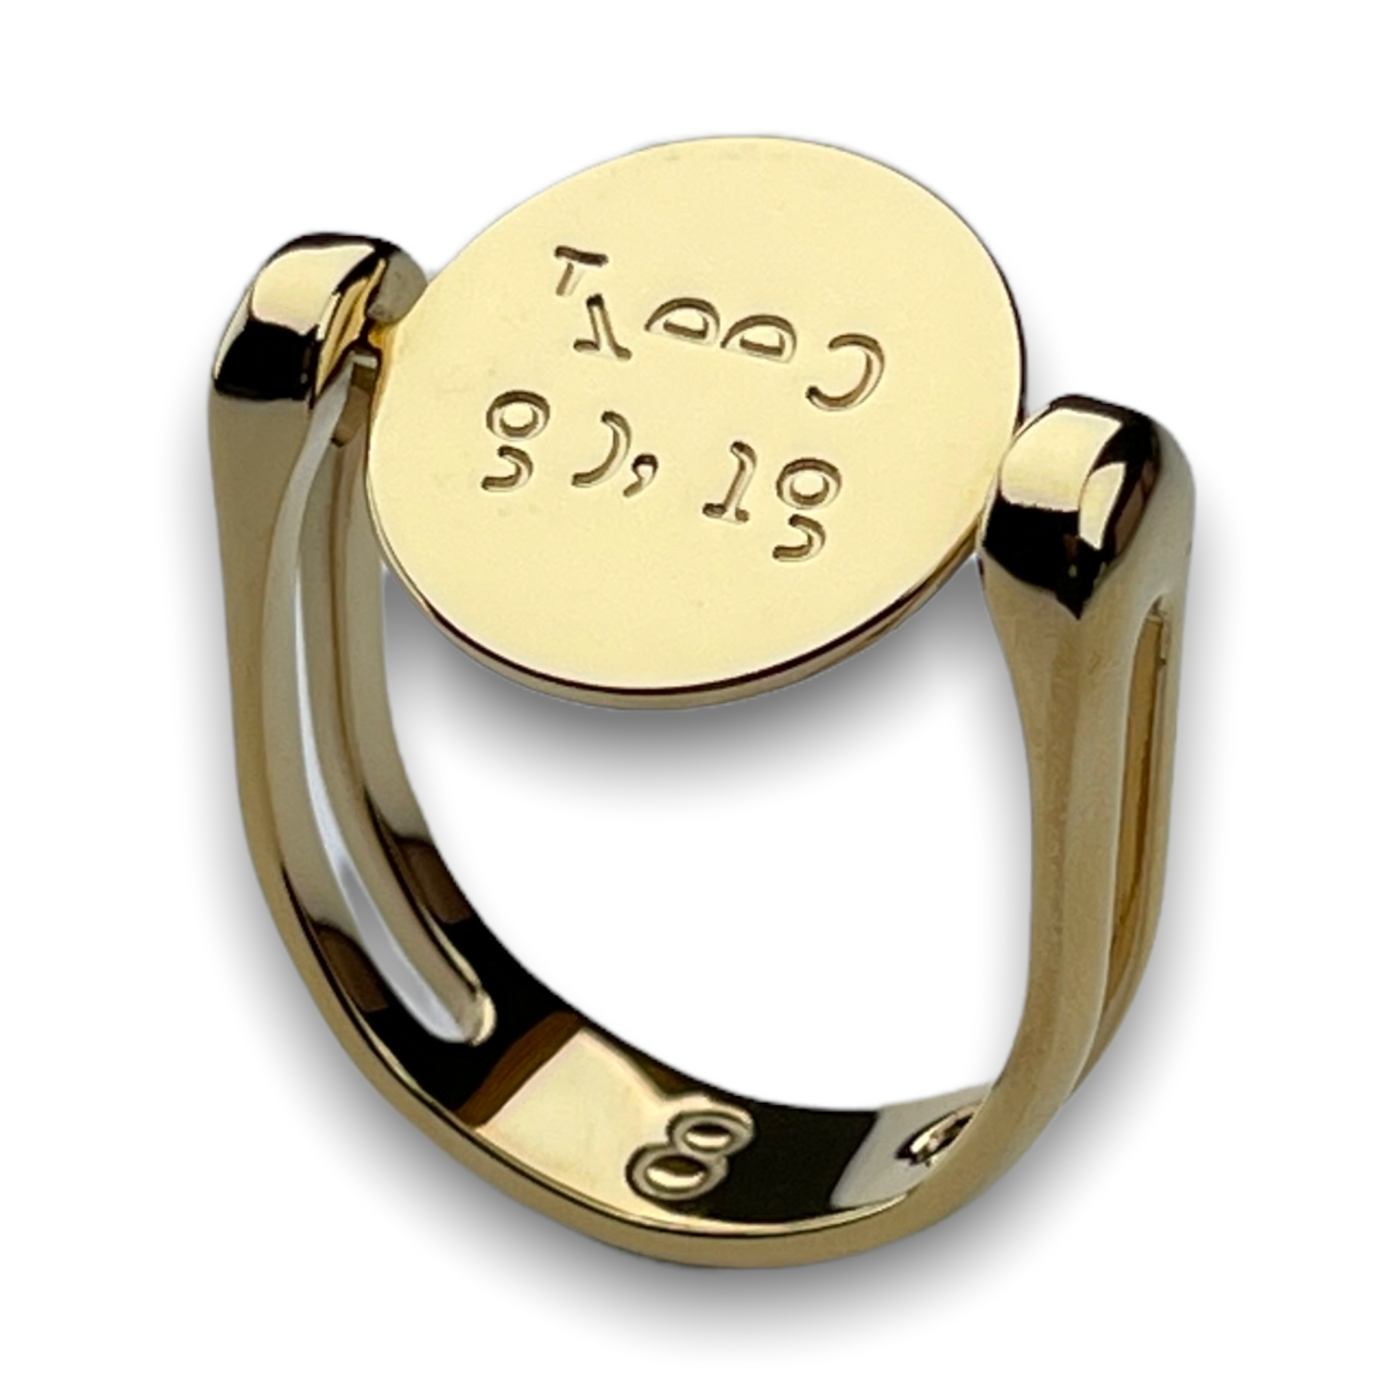 Keep go;ng Spin-to-reveal Fidget Ring